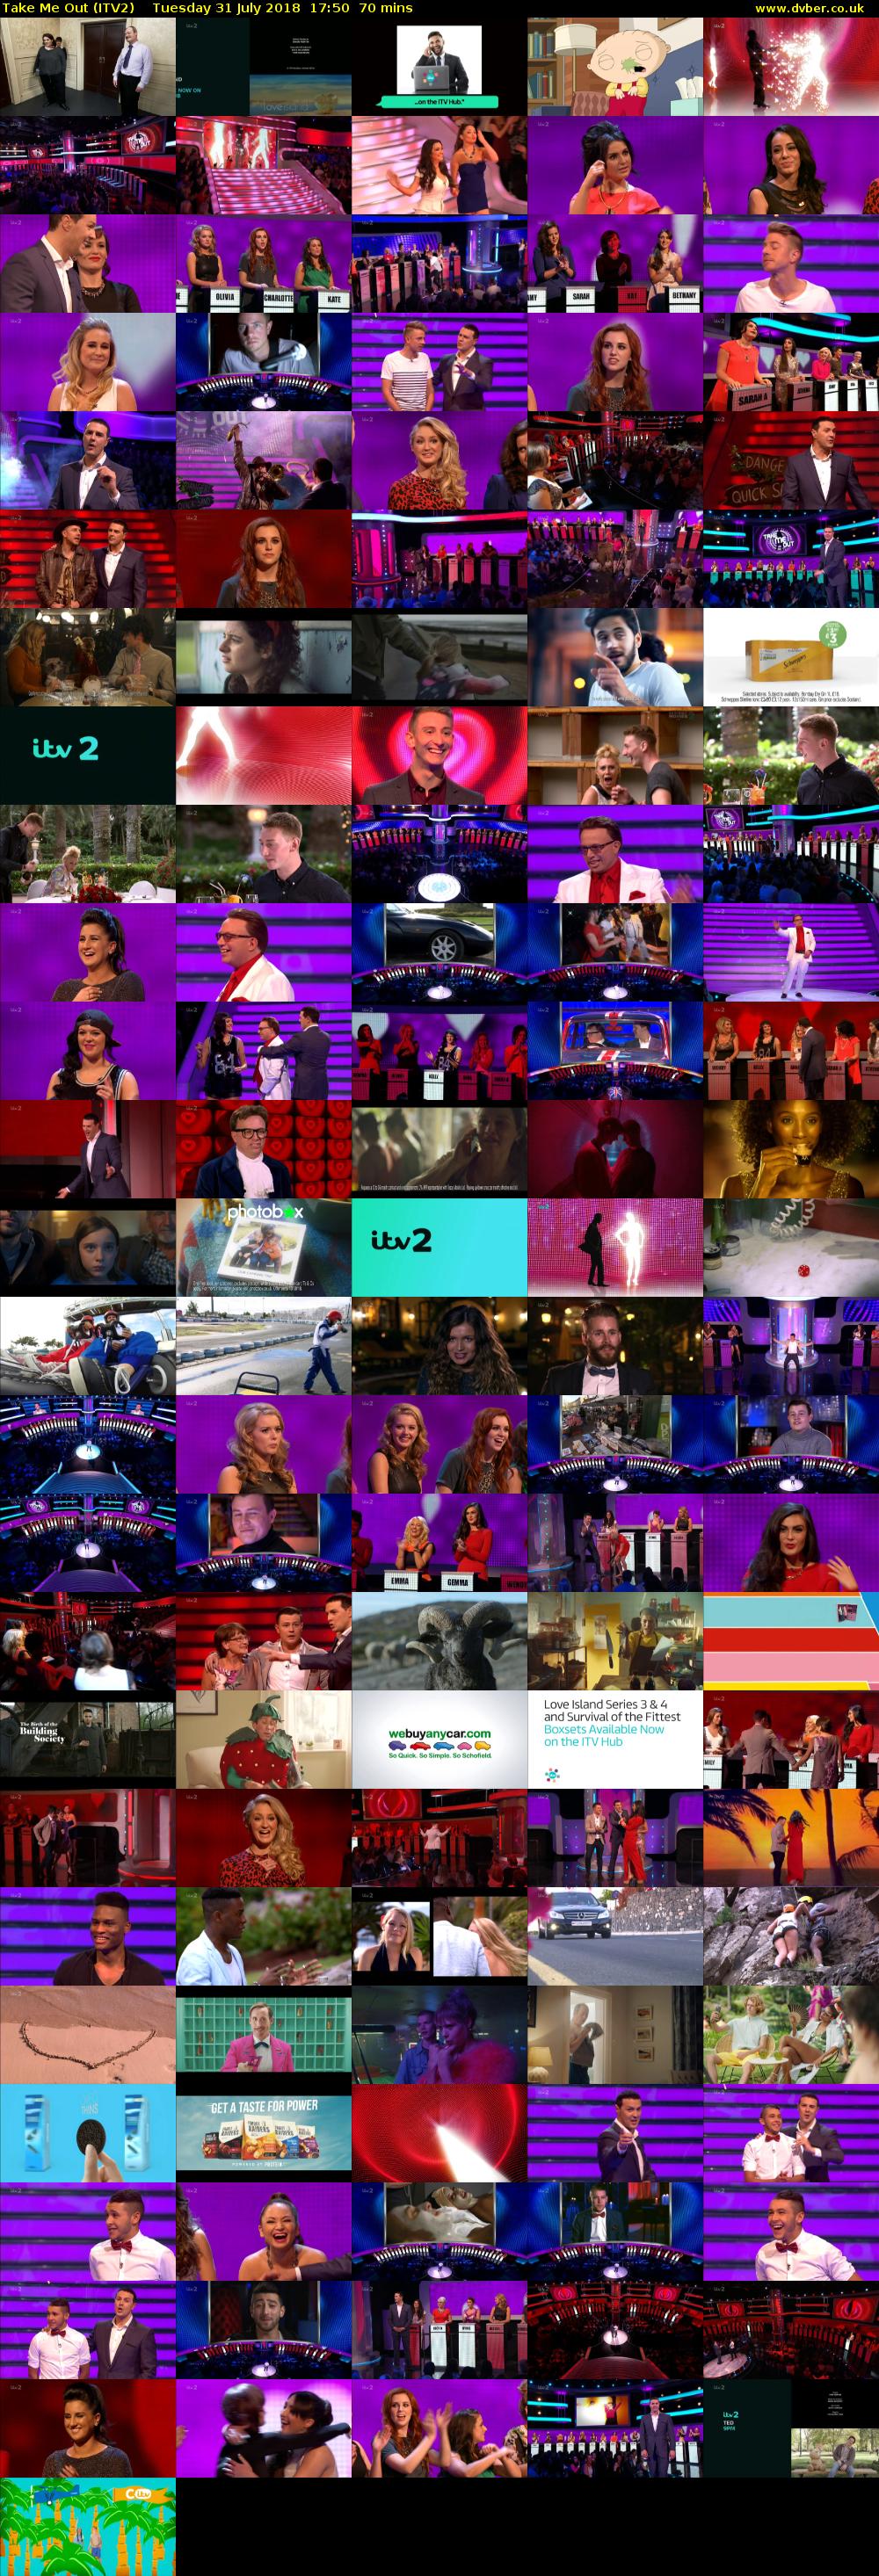 Take Me Out (ITV2) Tuesday 31 July 2018 17:50 - 19:00